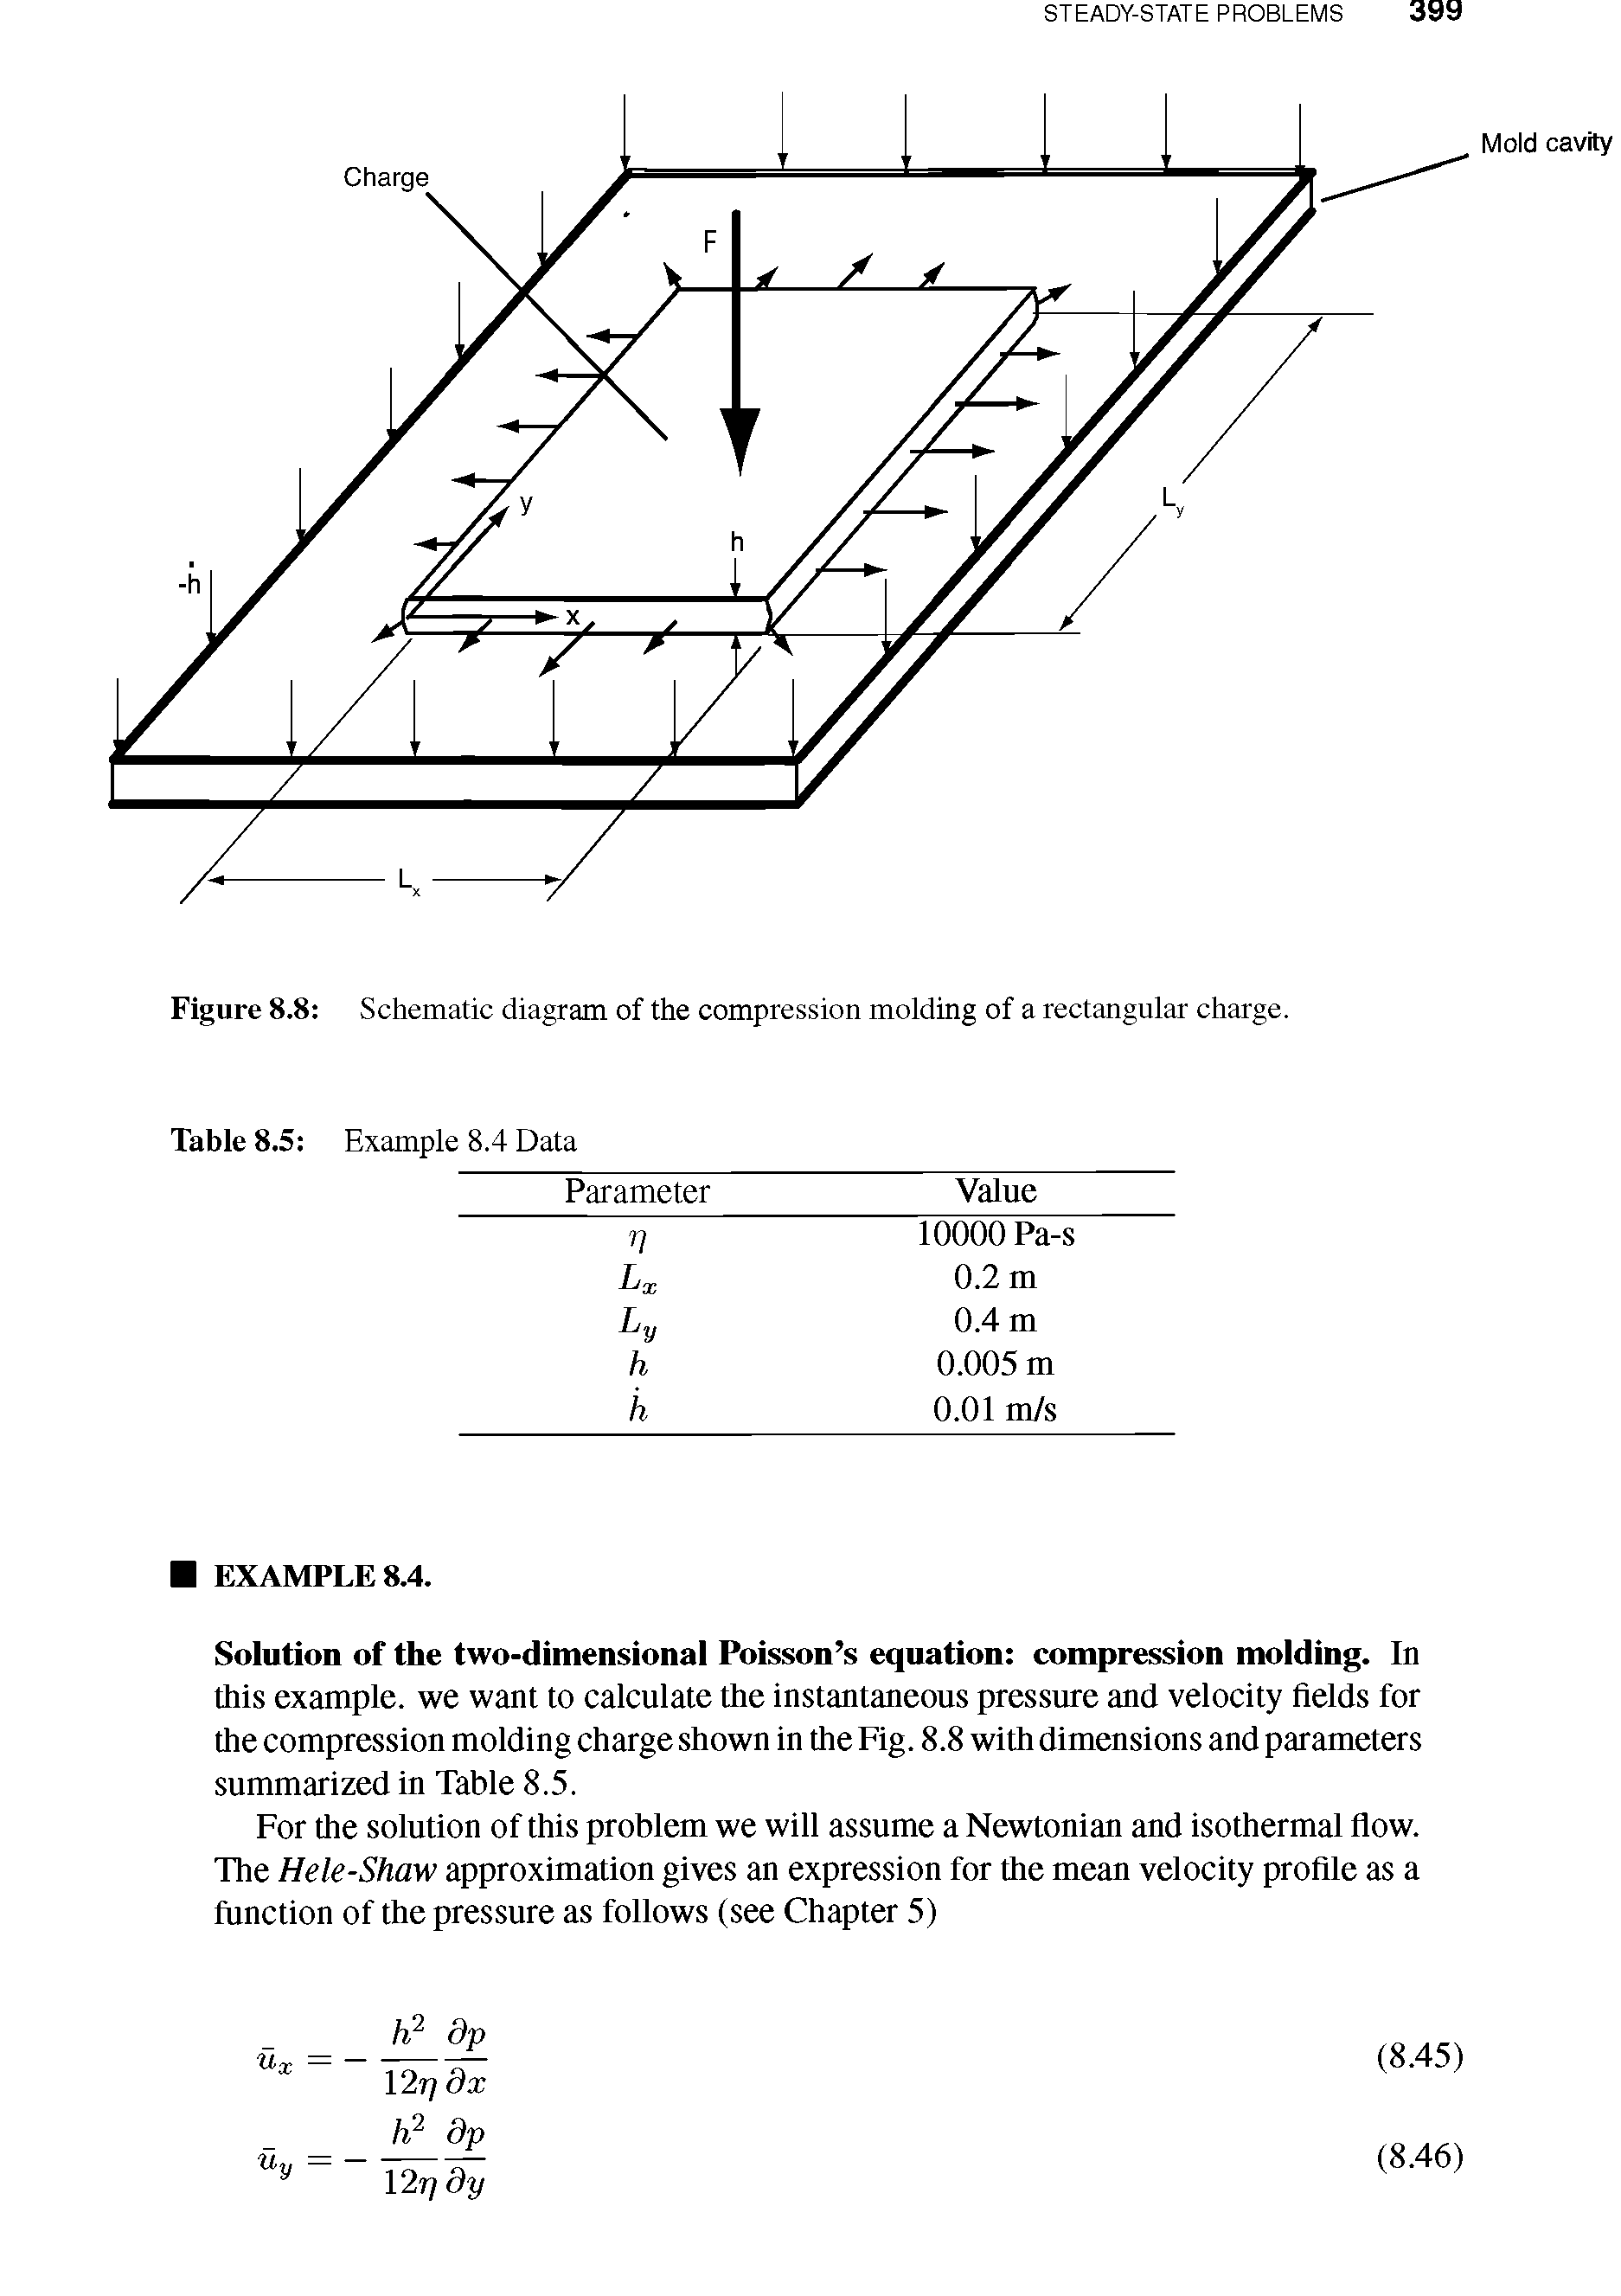 Figure 8.8 Schematic diagram of the compression molding of a rectangular charge. Table 8.5 Example 8.4 Data...